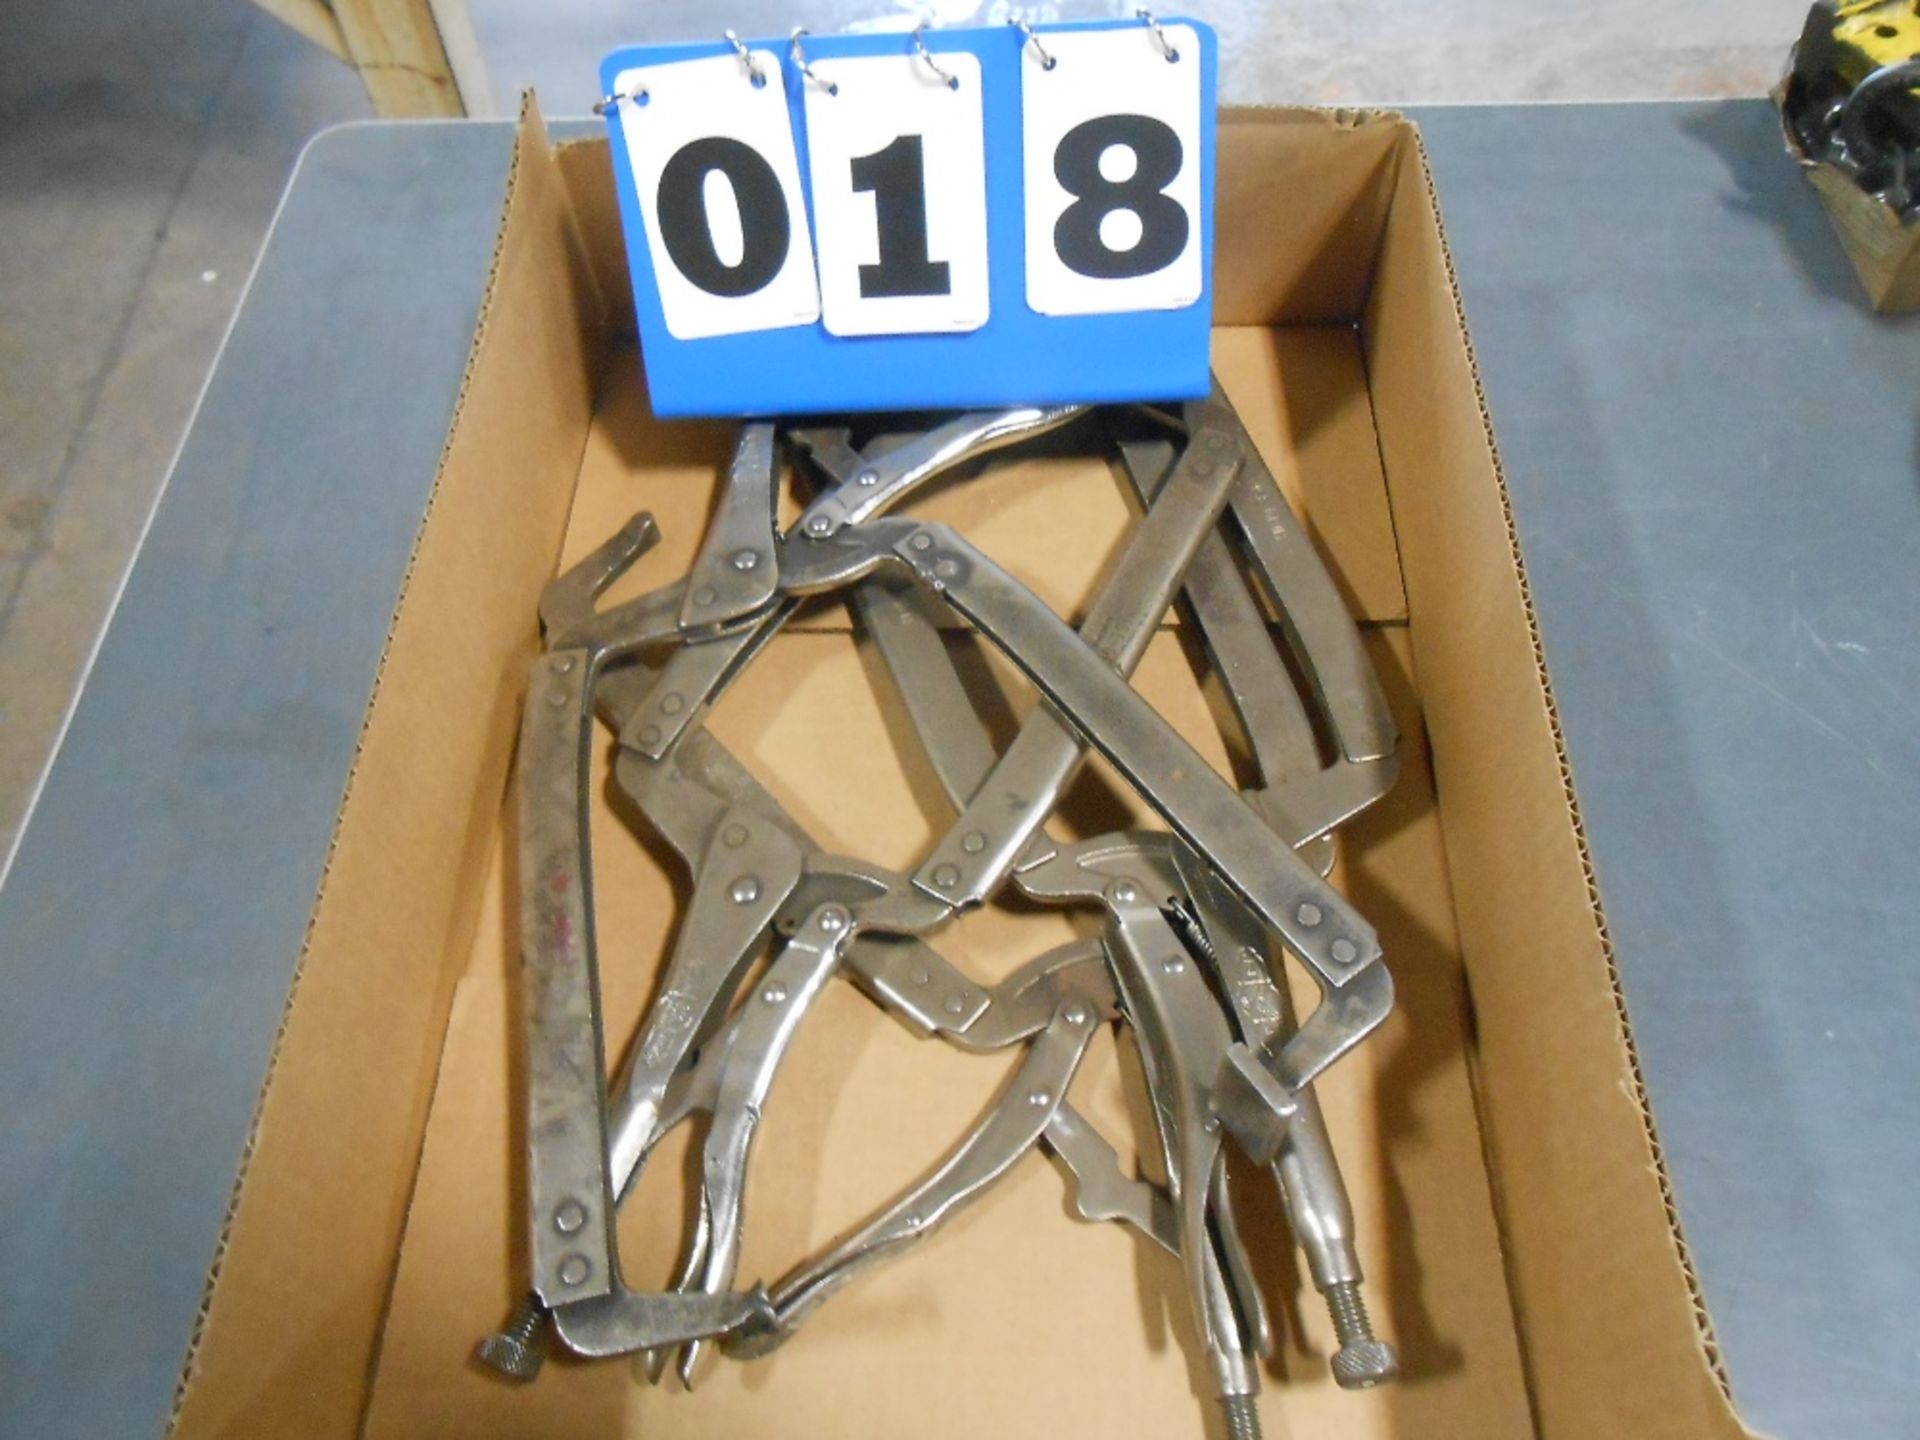 Box of 4 Large Clamps